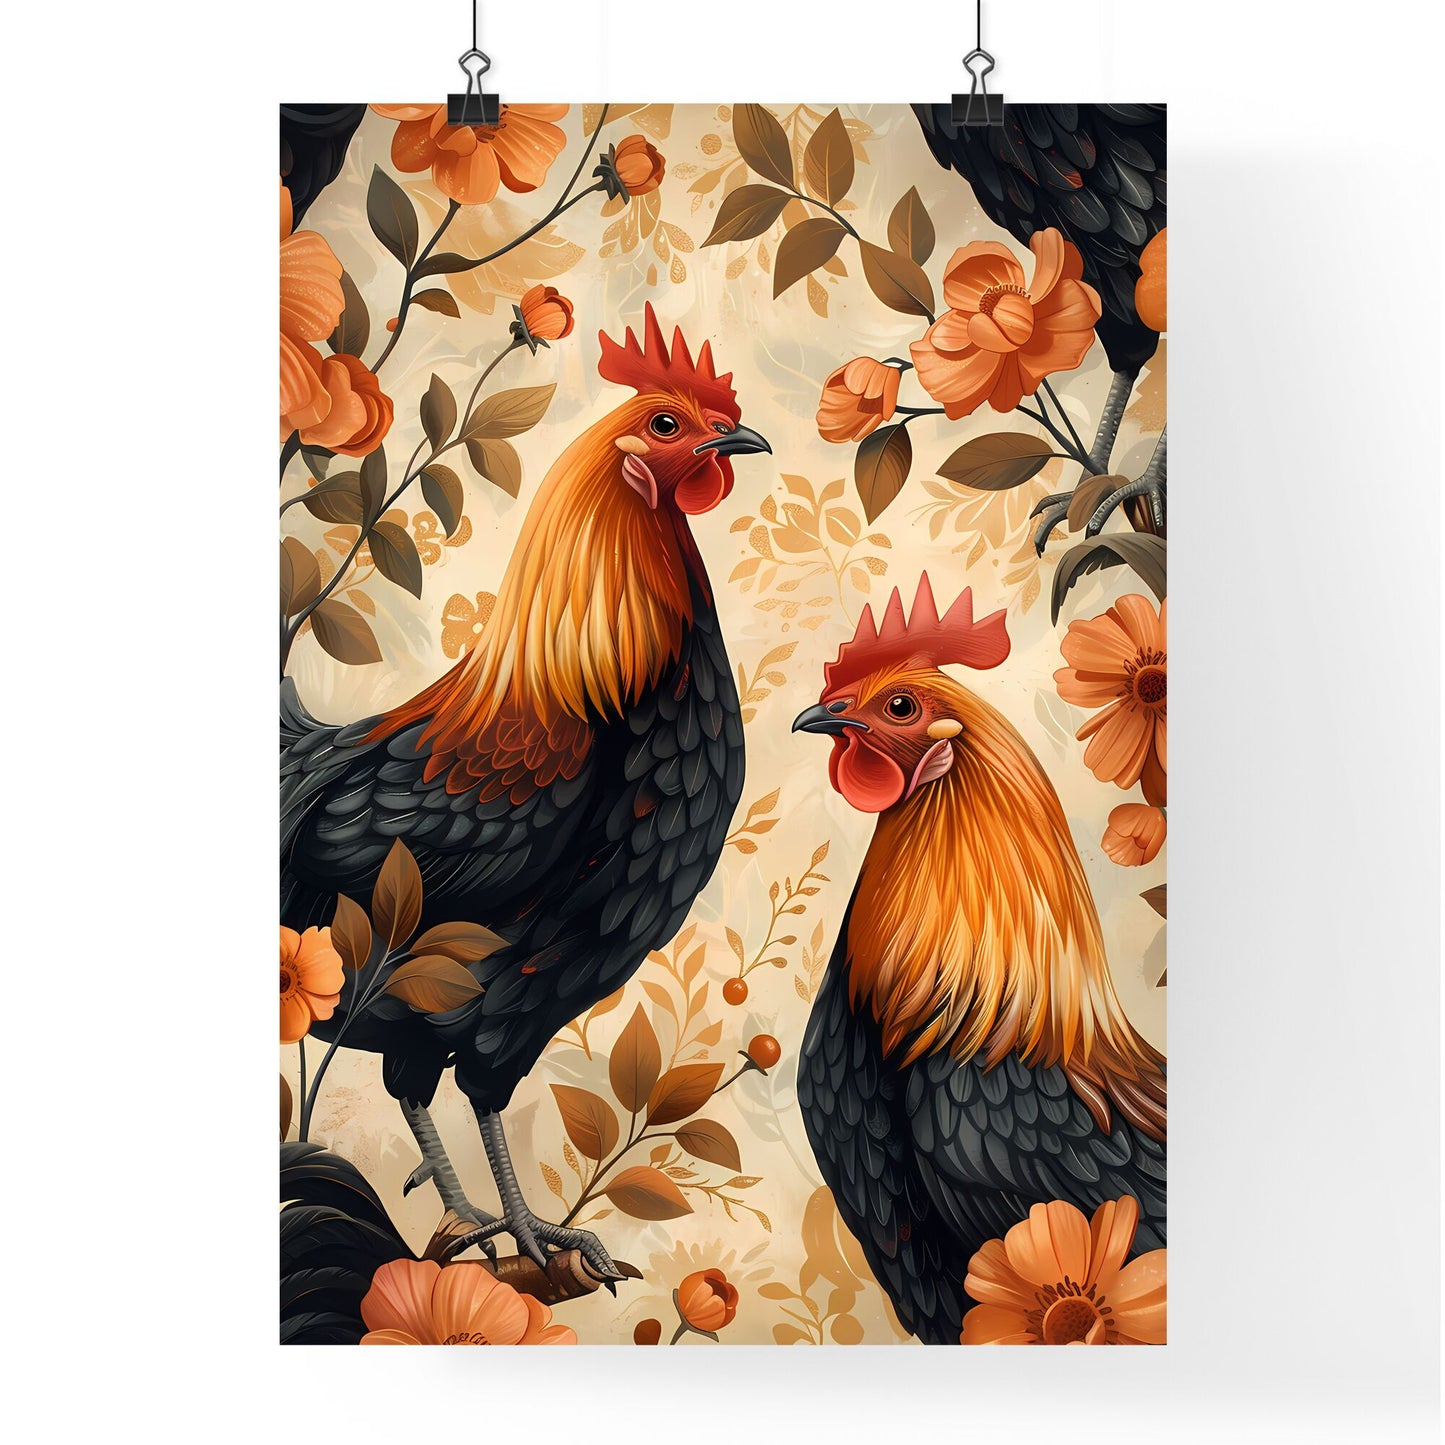 Artful Birthday Greeting Card Design Featuring Black Copper Maran Chickens, Feminine Browns and Hunter Orange Accents Default Title